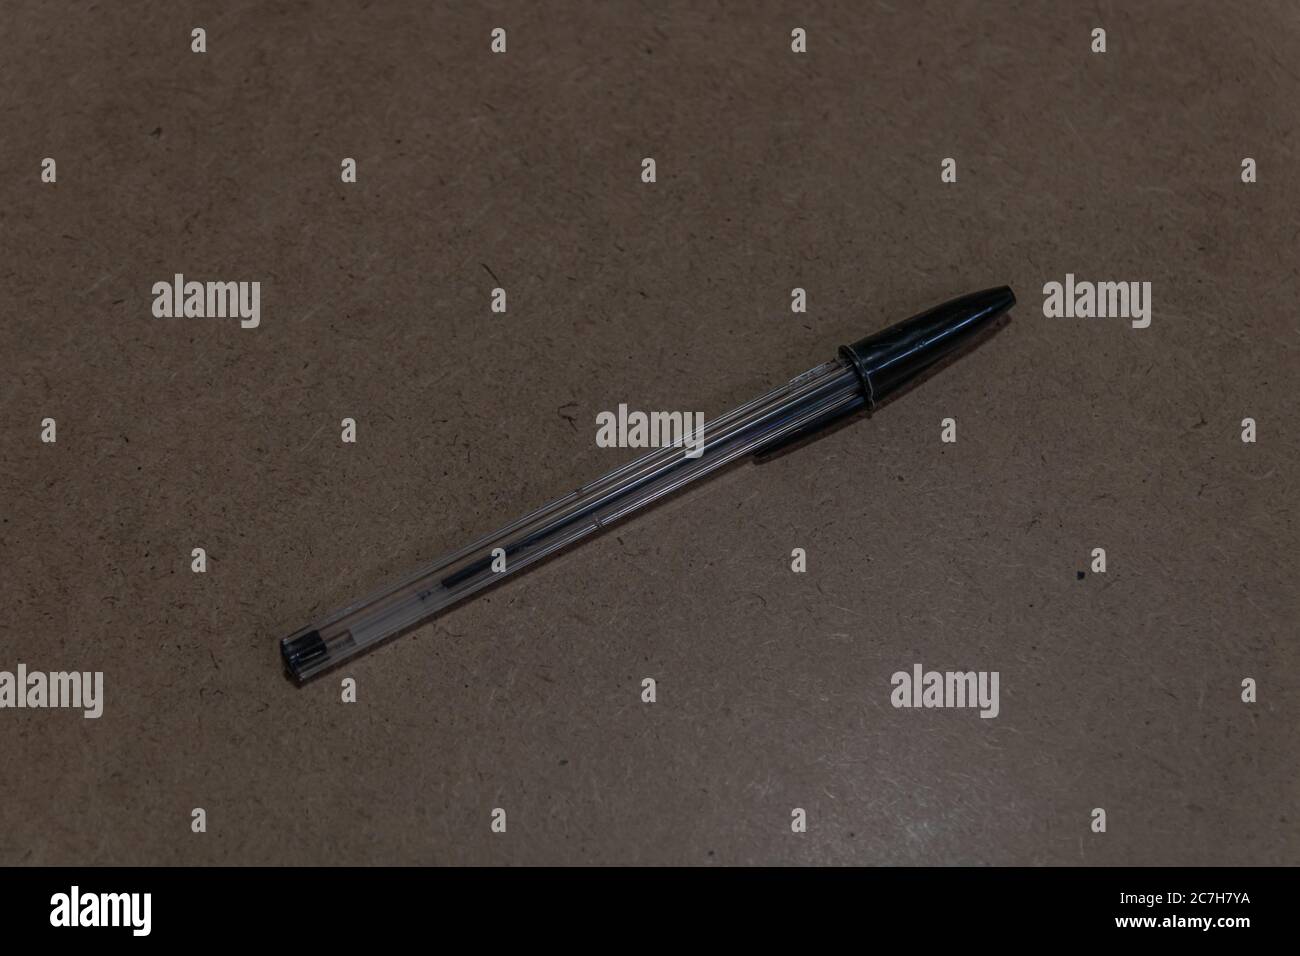 Closeup shot of a black pen on a brown surface Stock Photo